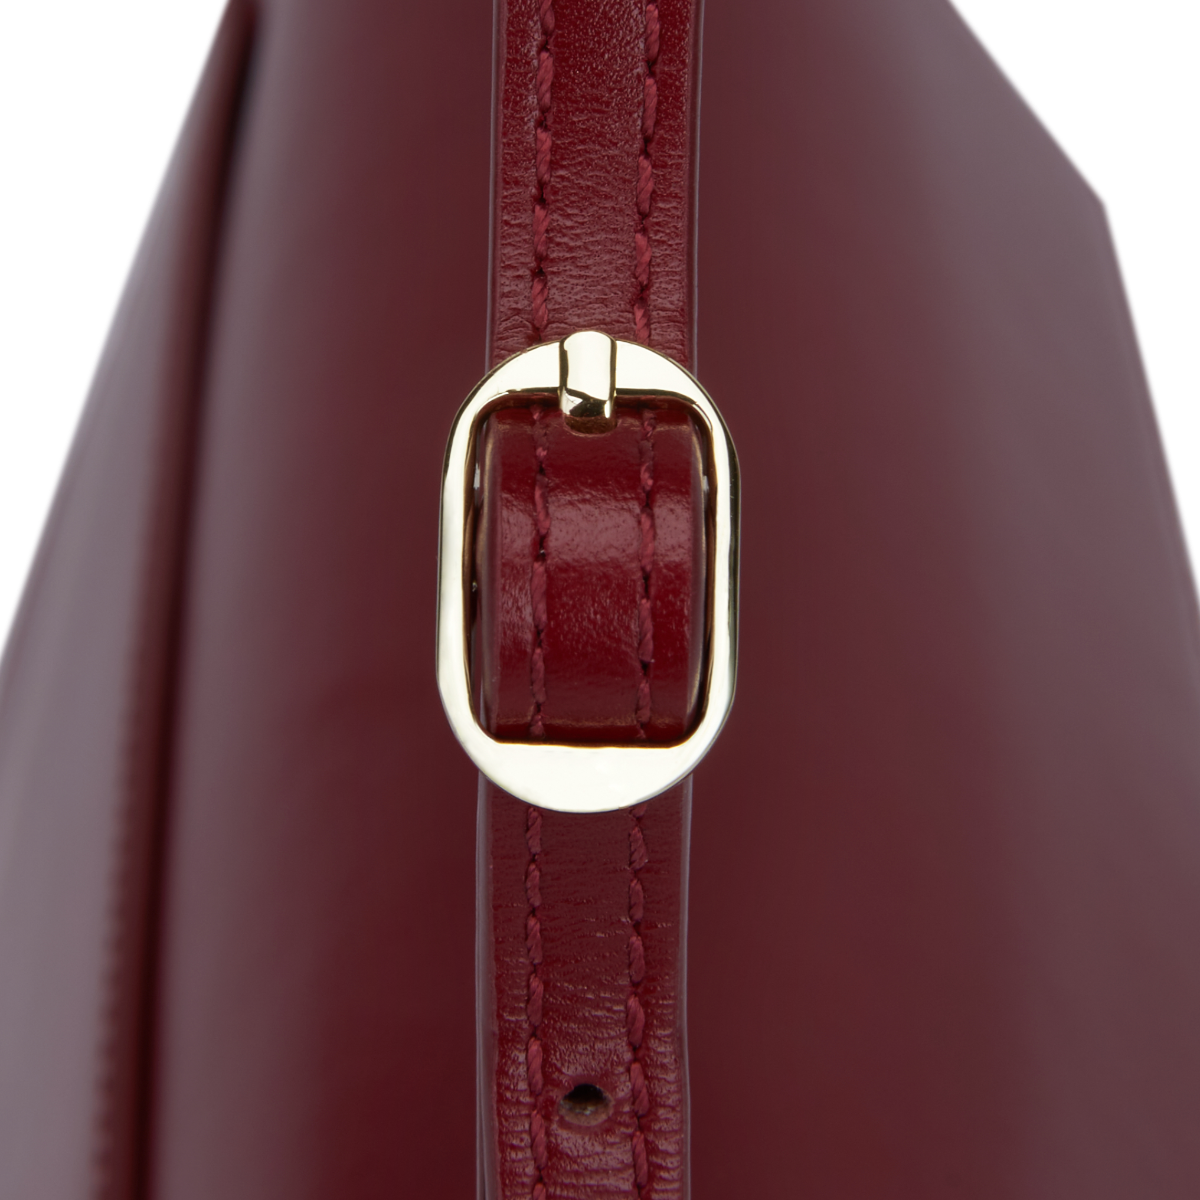 Dark Cherry Shoulder Bag(Pre-Order Only.Will Ship on May 10th)